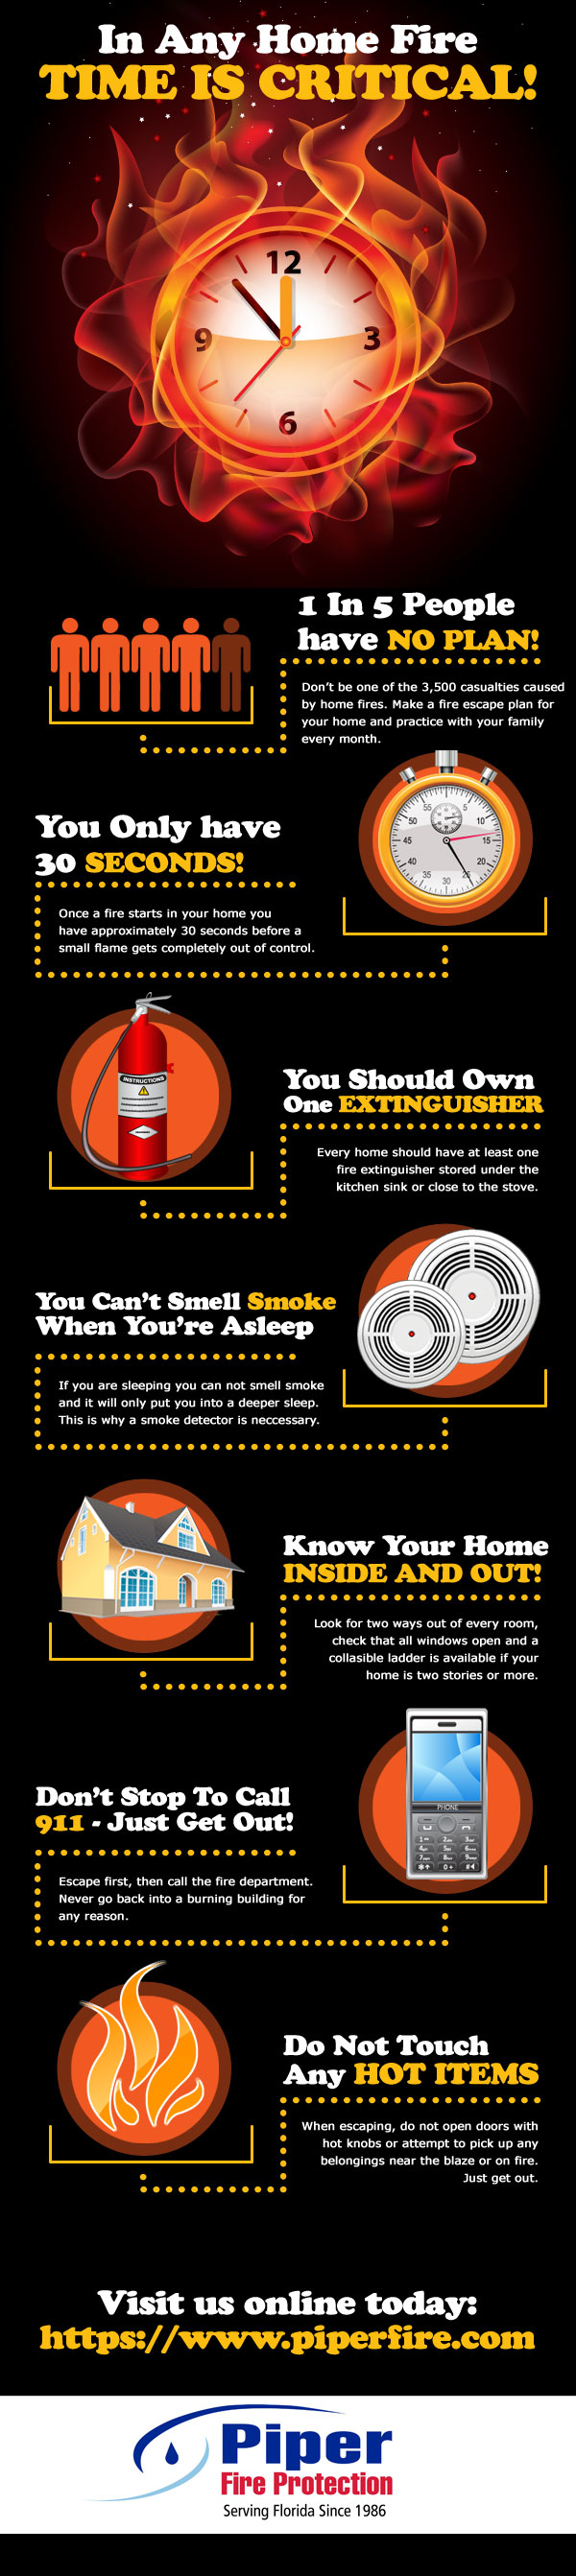 In Any Home Fire, Time is Critical!